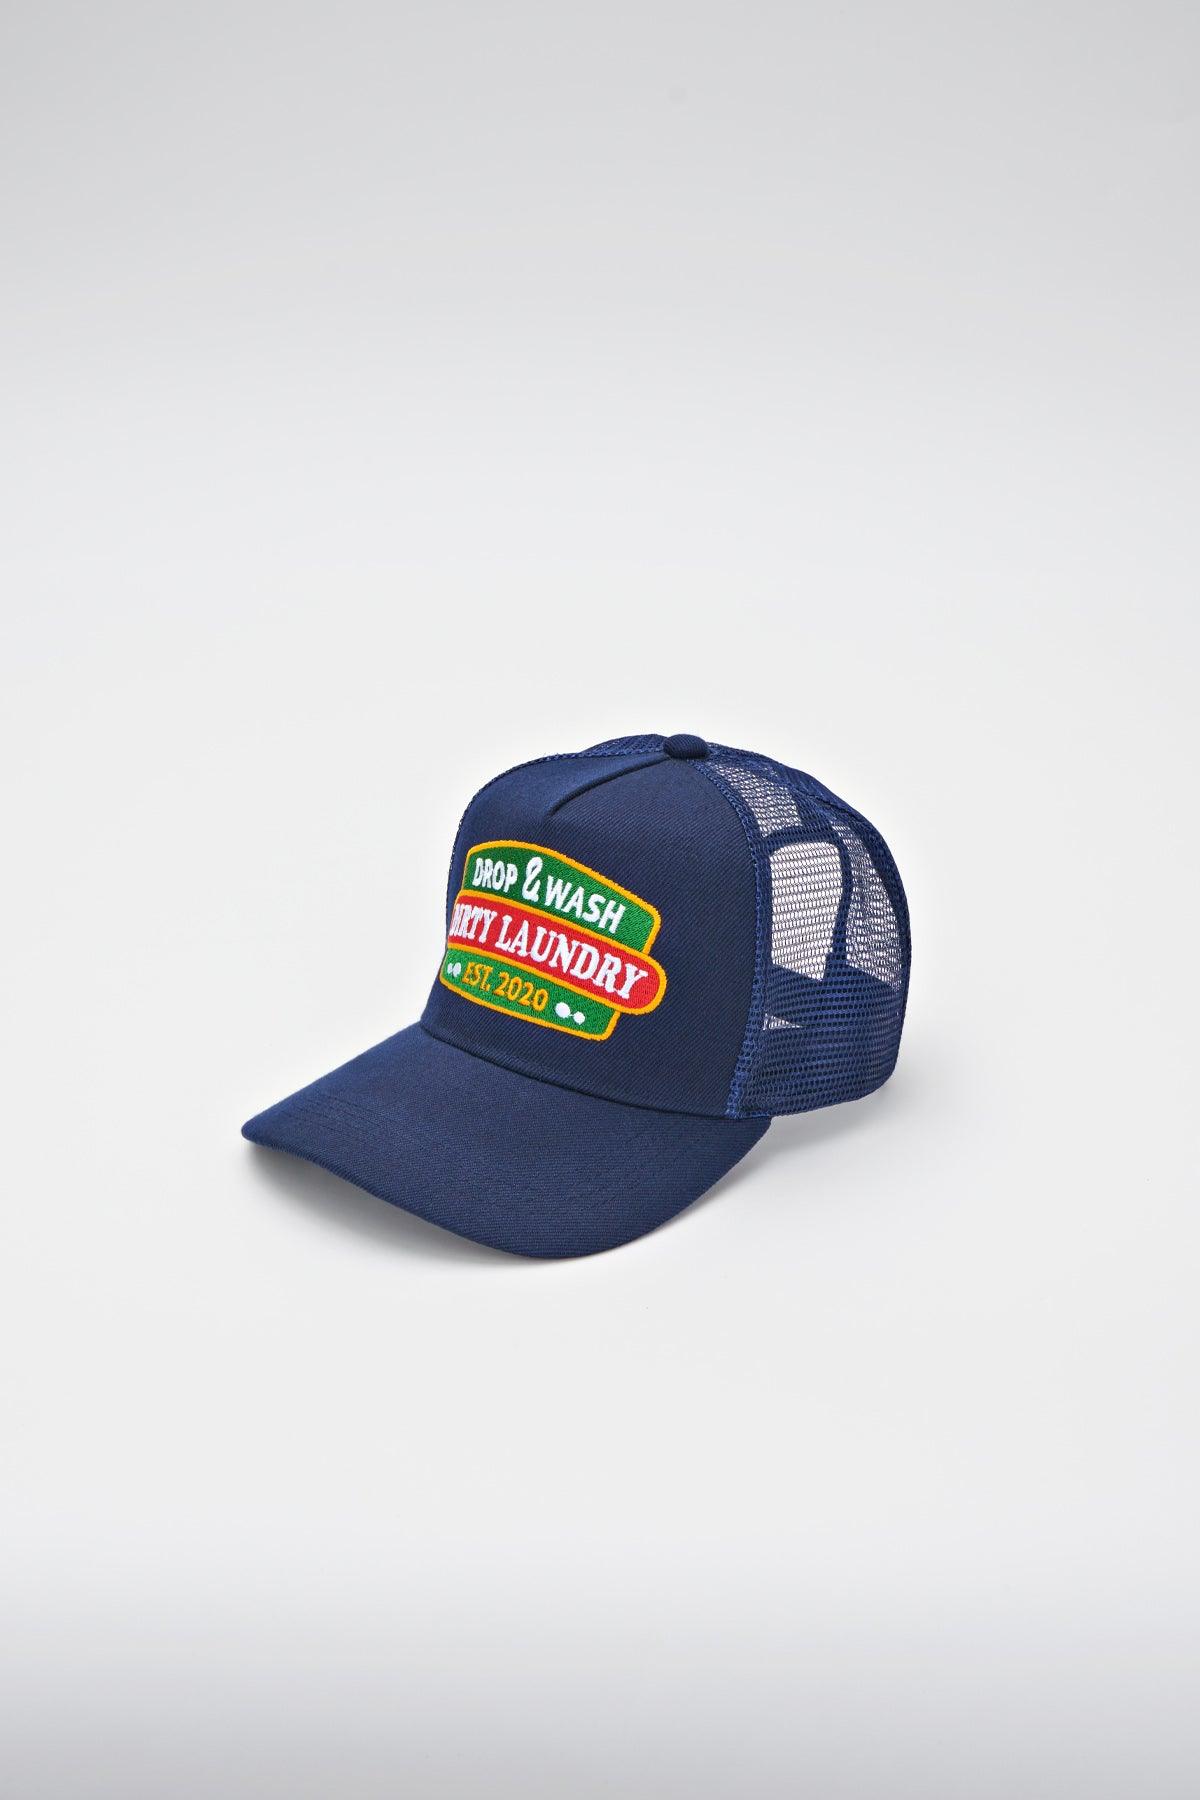 Dirty Laundry Drop and Wash Trucker Cap